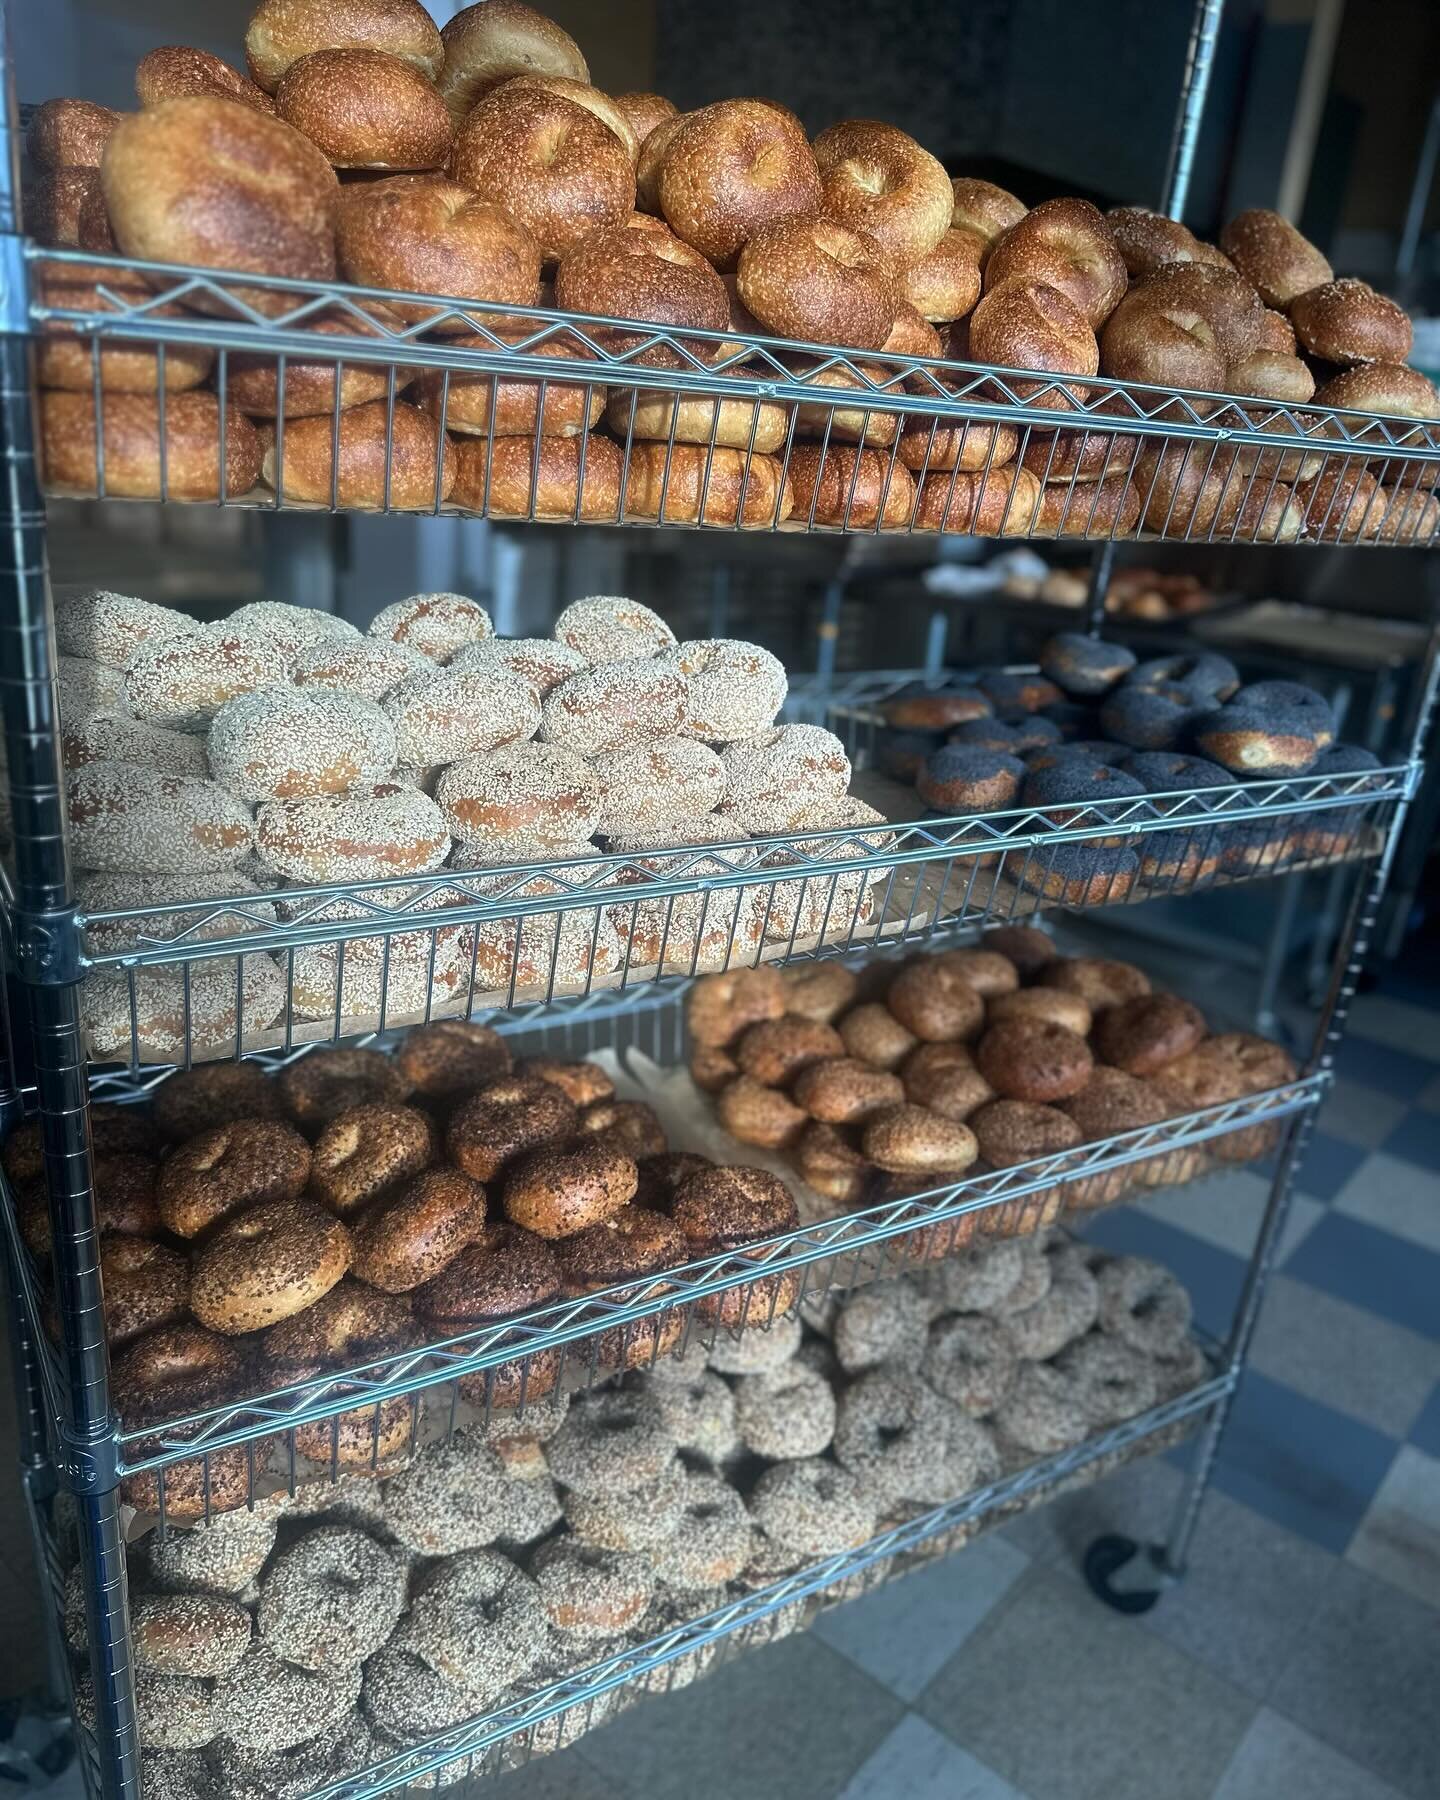 Hey it&rsquo;s March!  As spring approaches we&rsquo;re gonna be pulling off of deliveries to focus our efforts on higher bagel numbers in the shop.
&hellip;
If you haven&rsquo;t been to the shop yet, come on by!  Walk ins are always welcome.  We&rsq